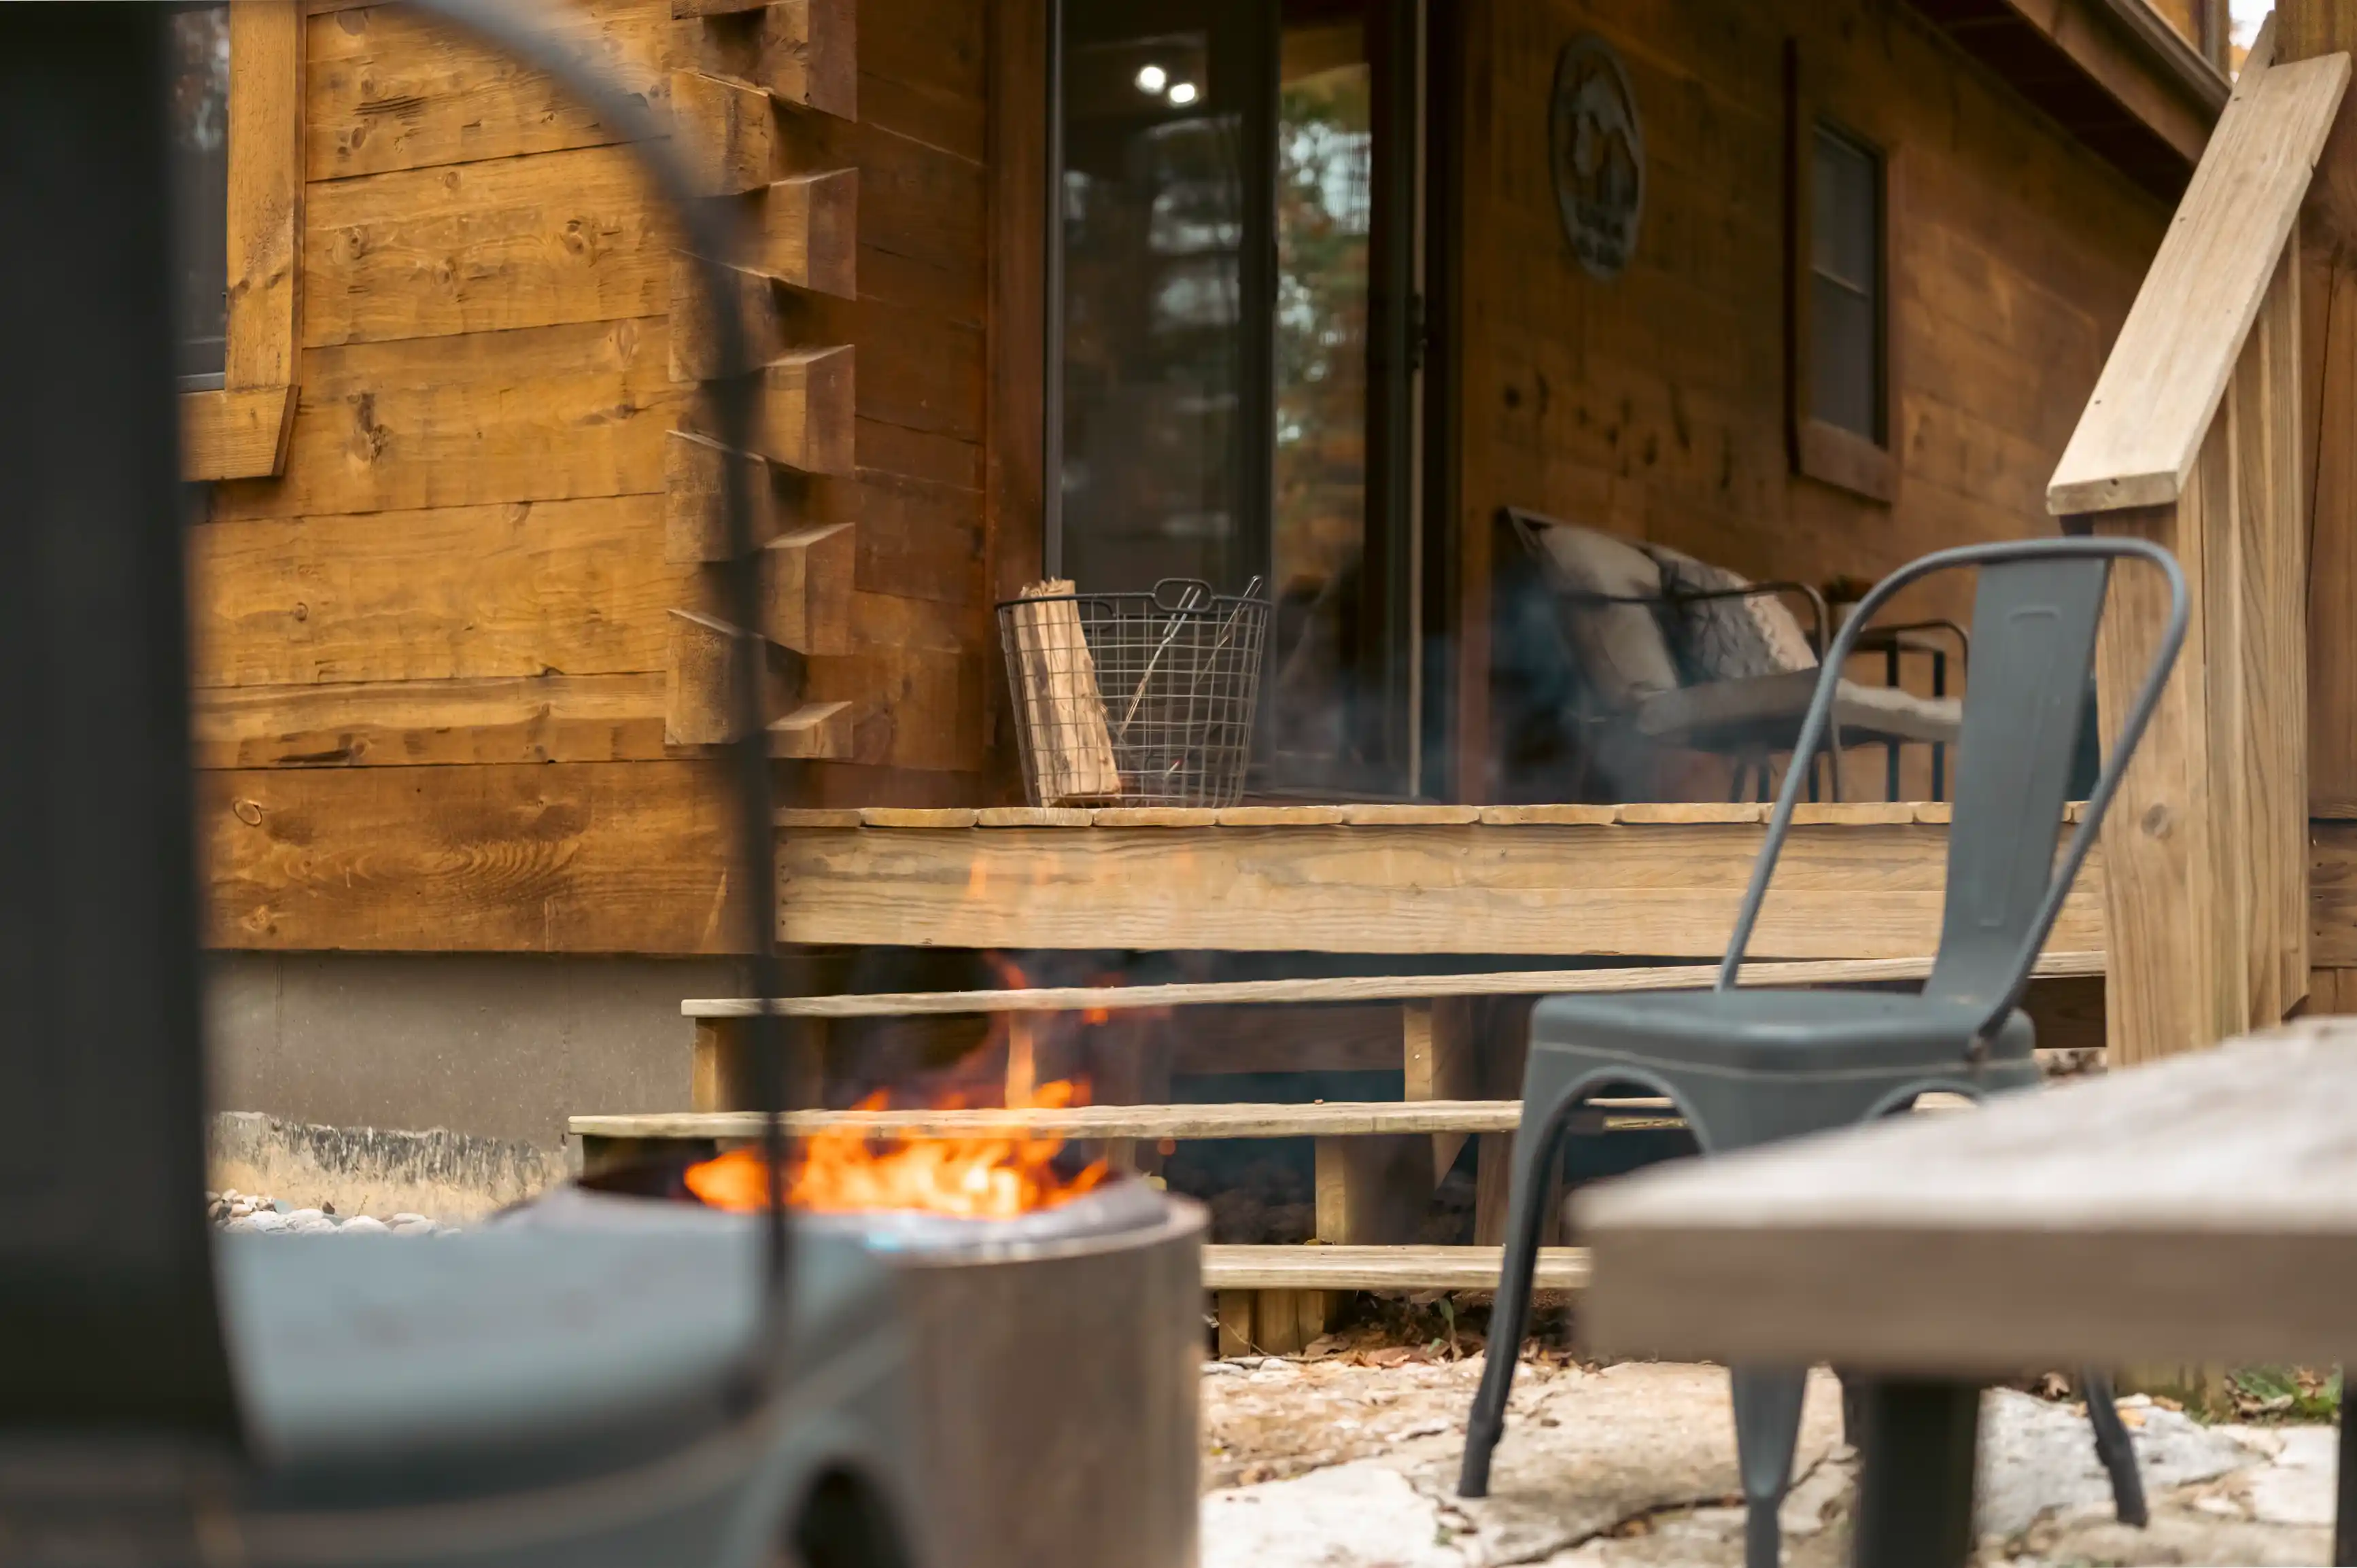 Cozy wooden cabin porch with a lit fire pit in focus and two metal chairs around it.